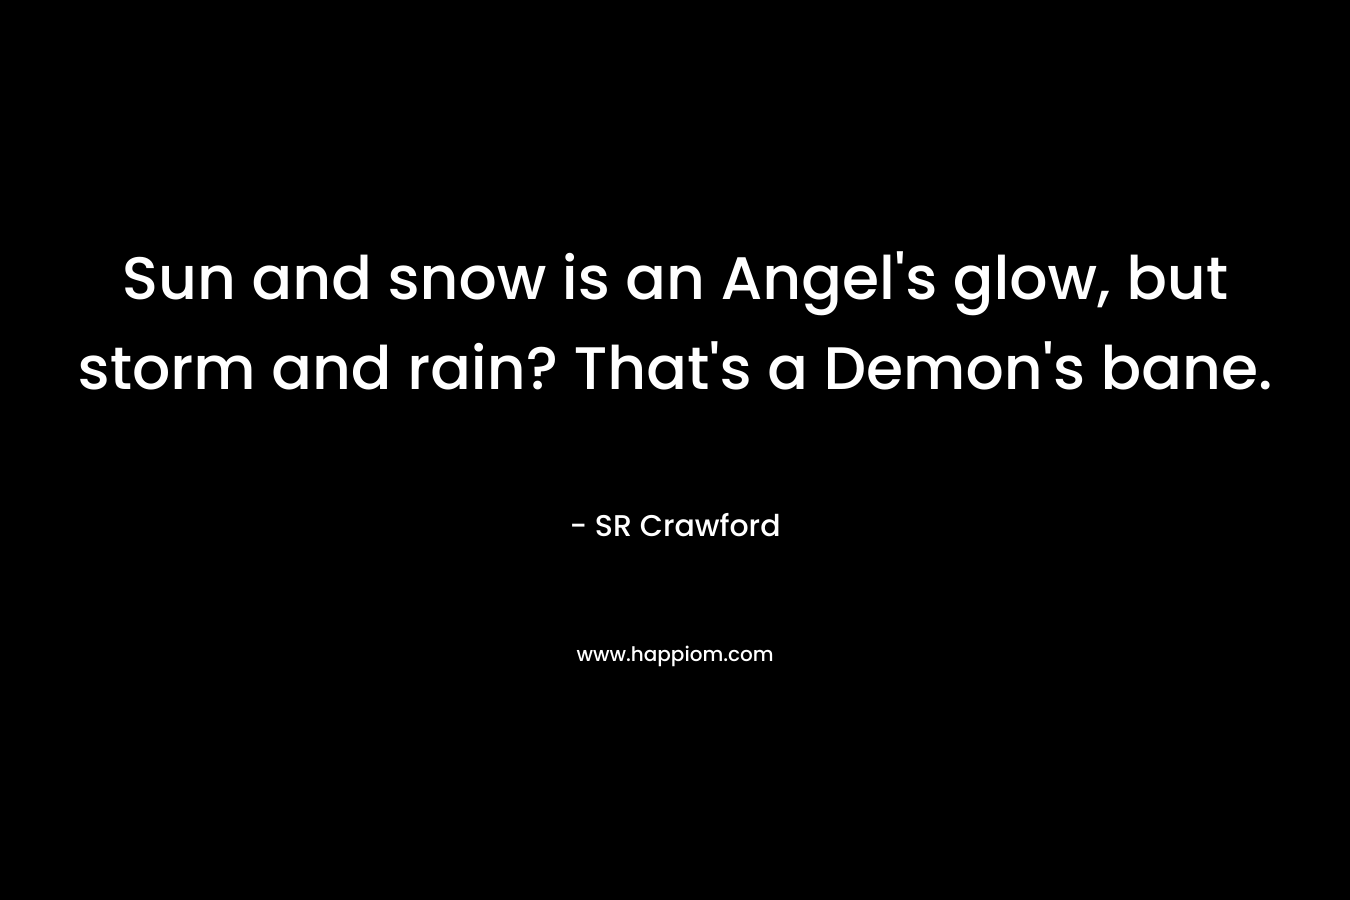 Sun and snow is an Angel’s glow, but storm and rain? That’s a Demon’s bane. – SR Crawford